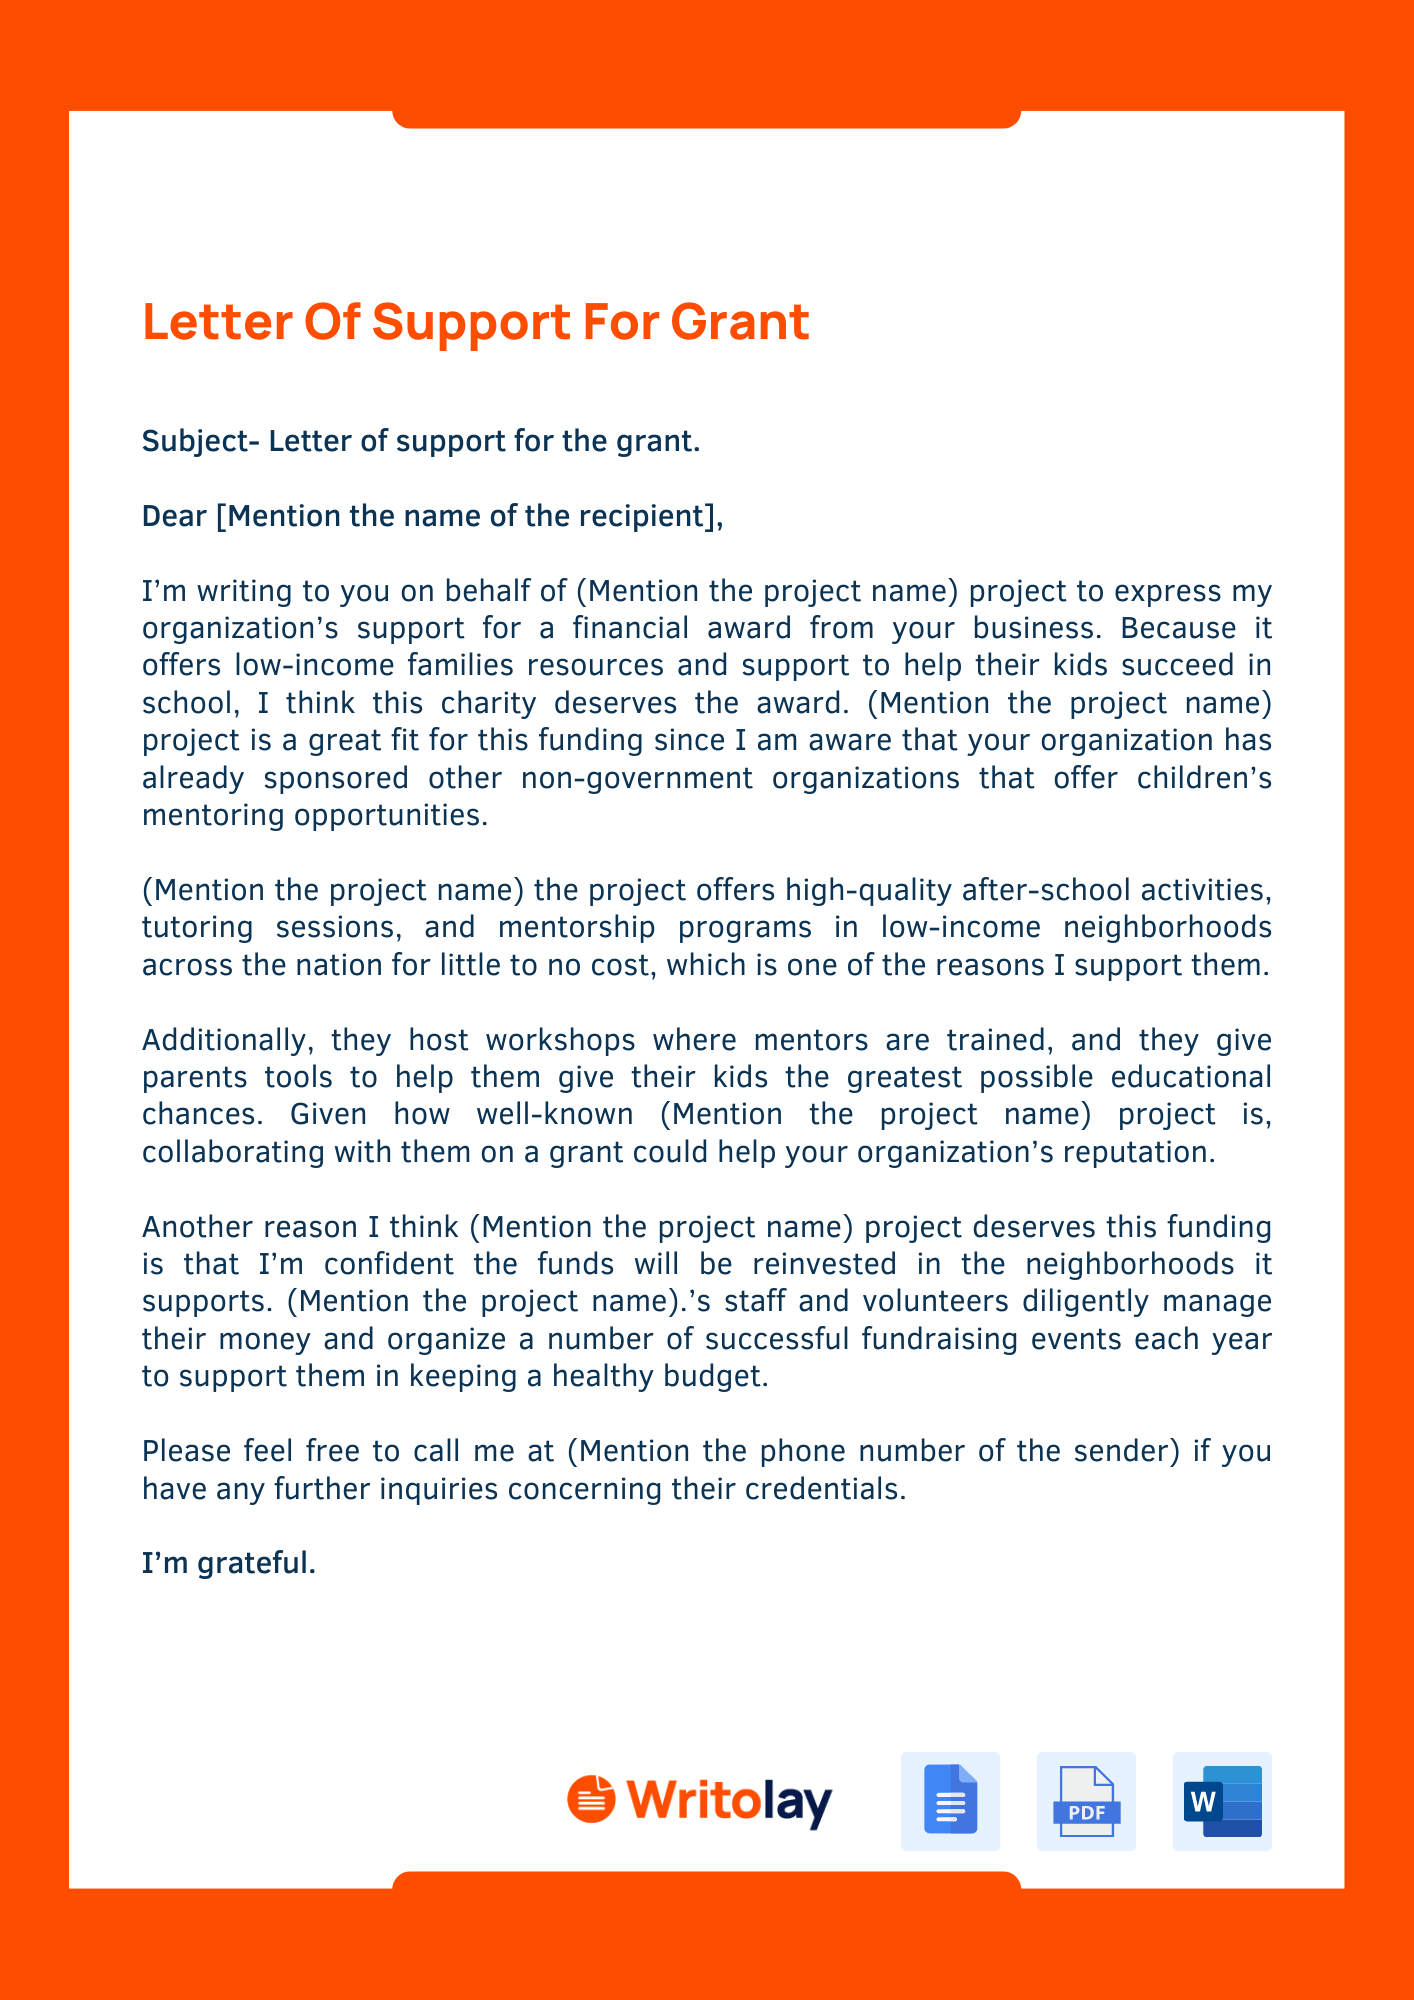 Letter Of Support For Grant 1 